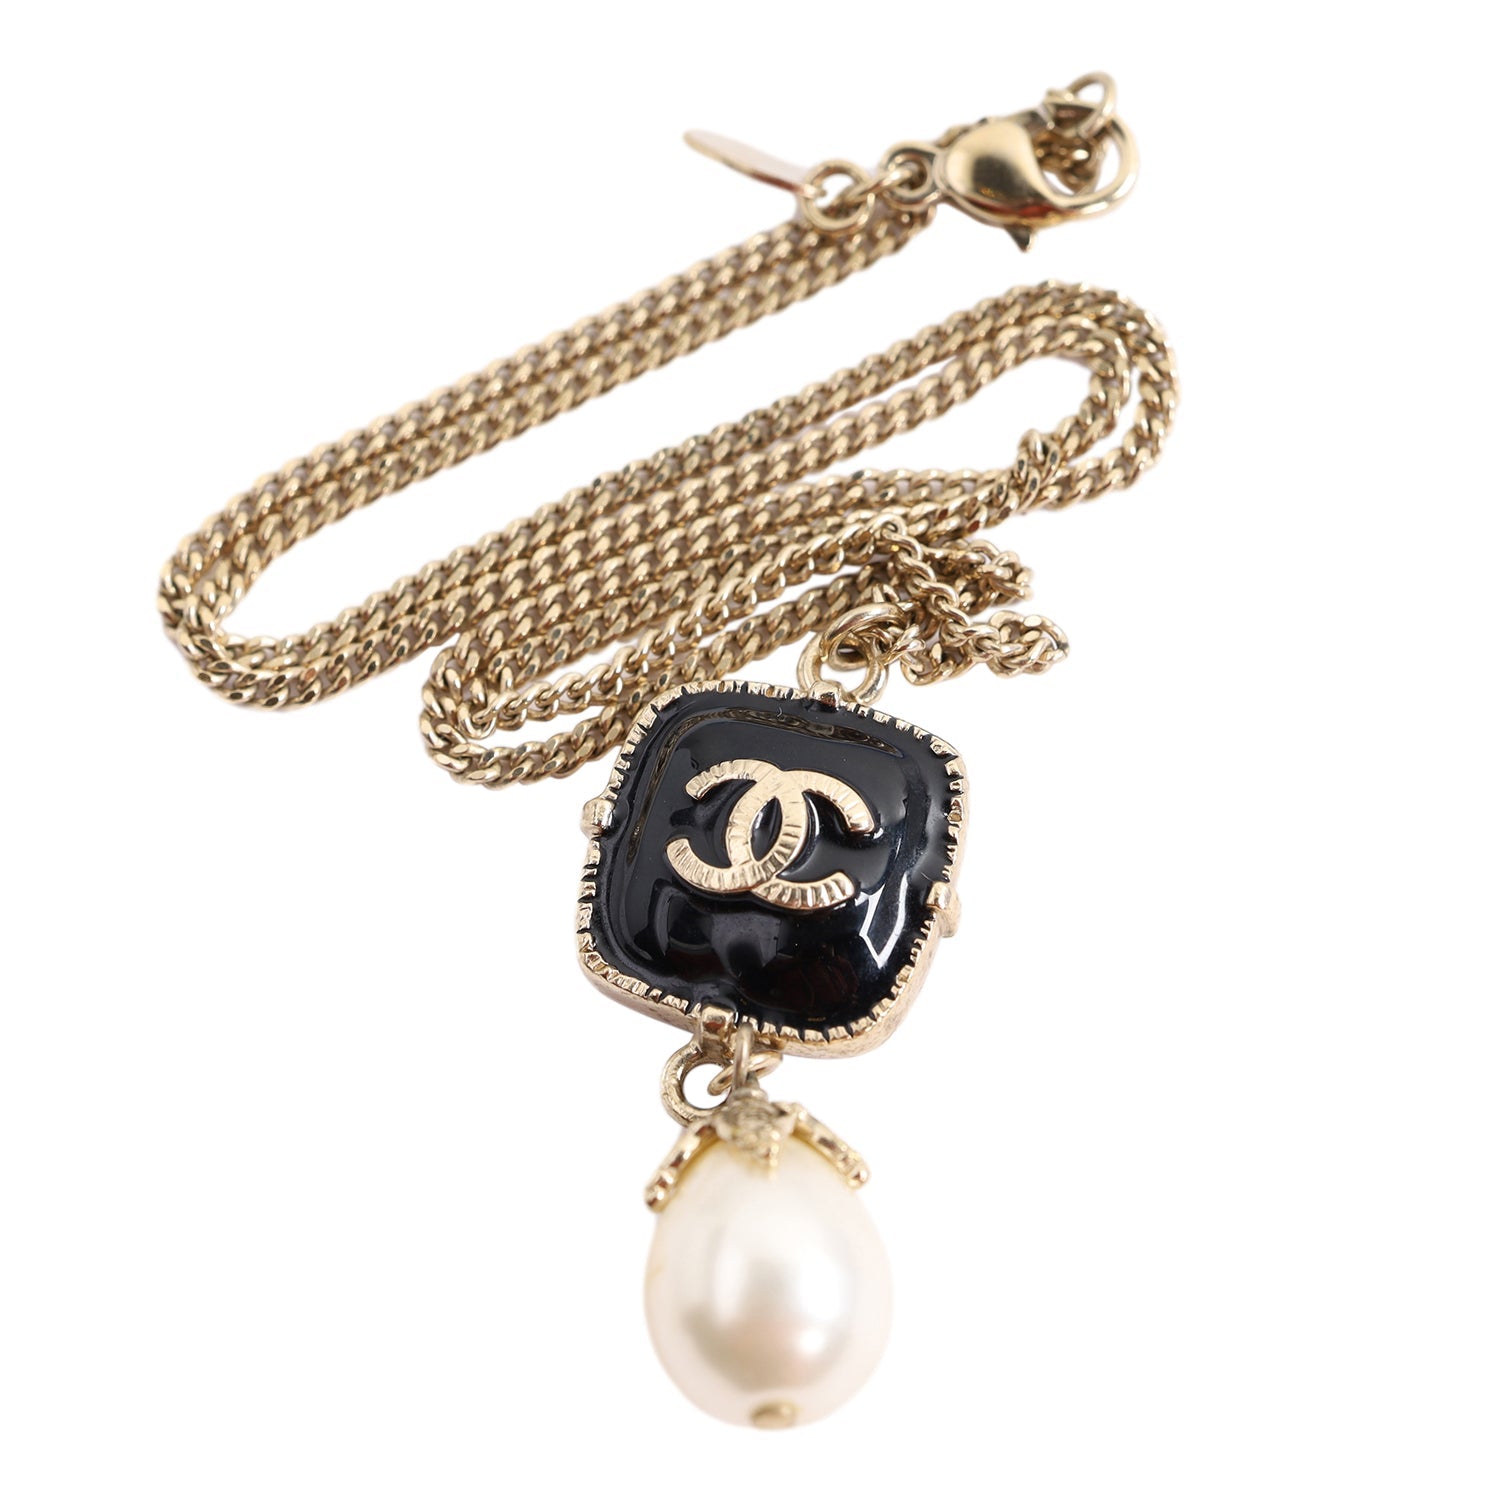 Chanel Enamel and Faux Pearl Jacket Charm Necklace